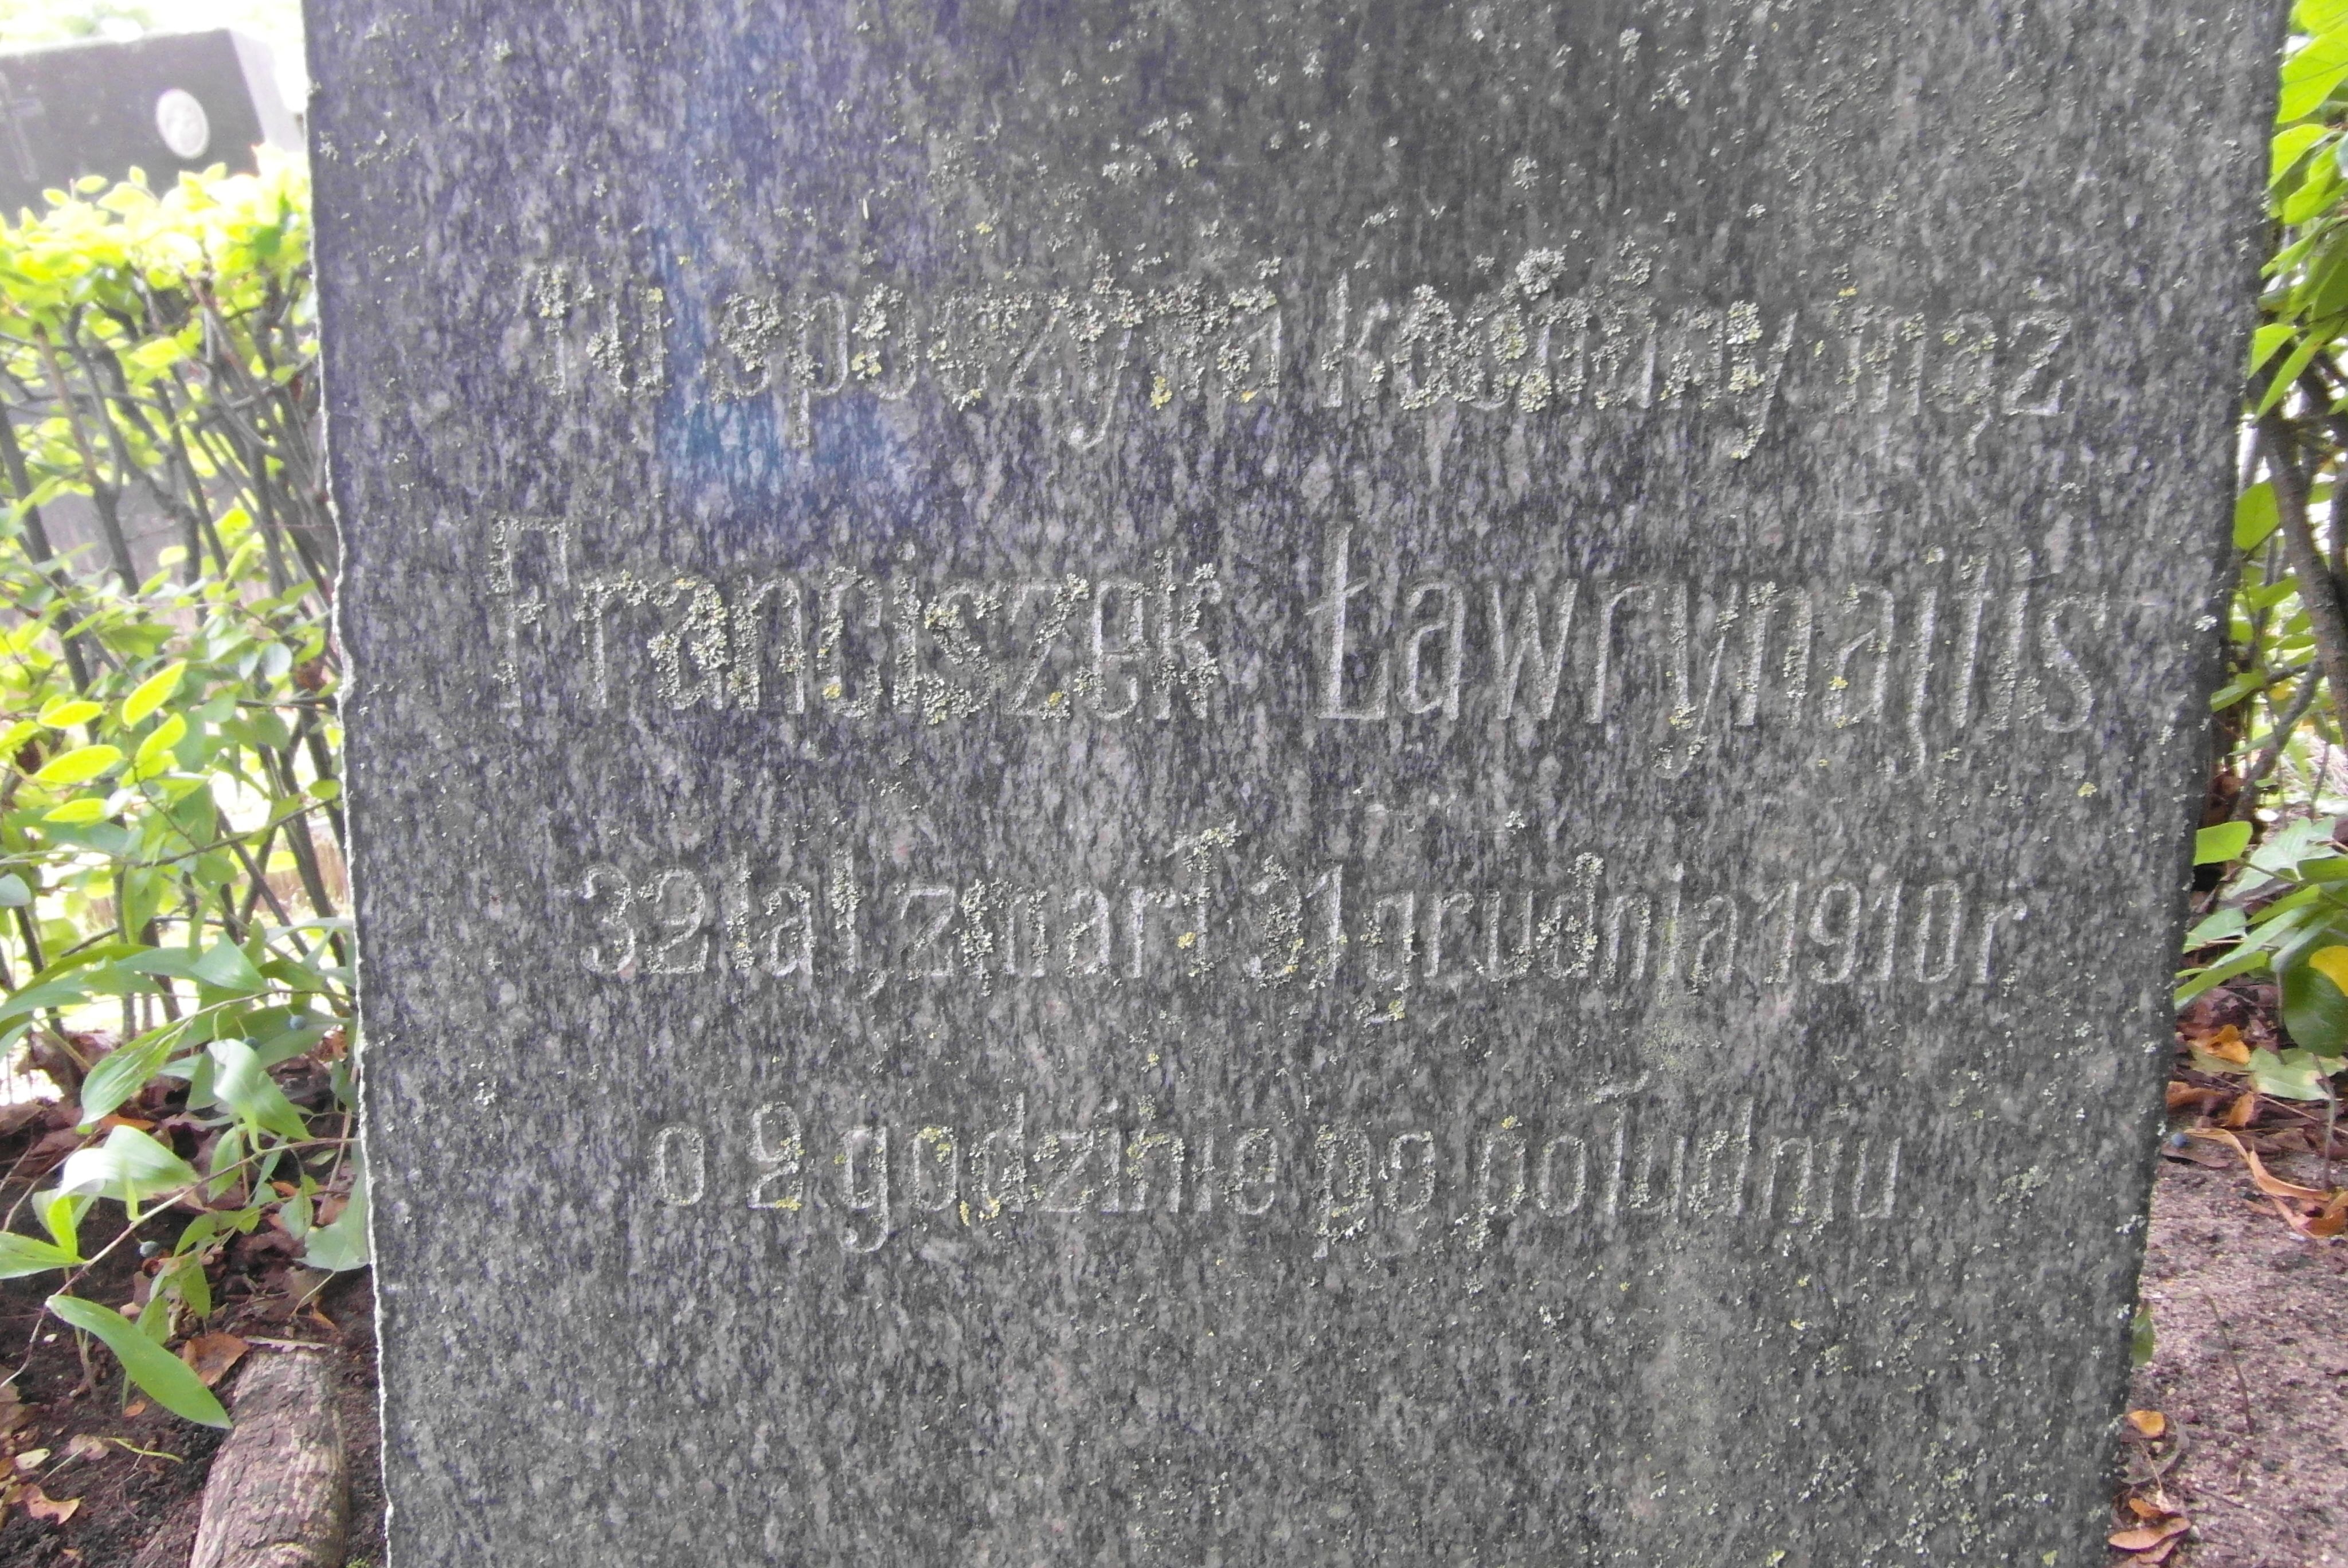 Inscription from the gravestone of Francis Lavrynaitis, St Michael's cemetery in Riga, as of 2021.